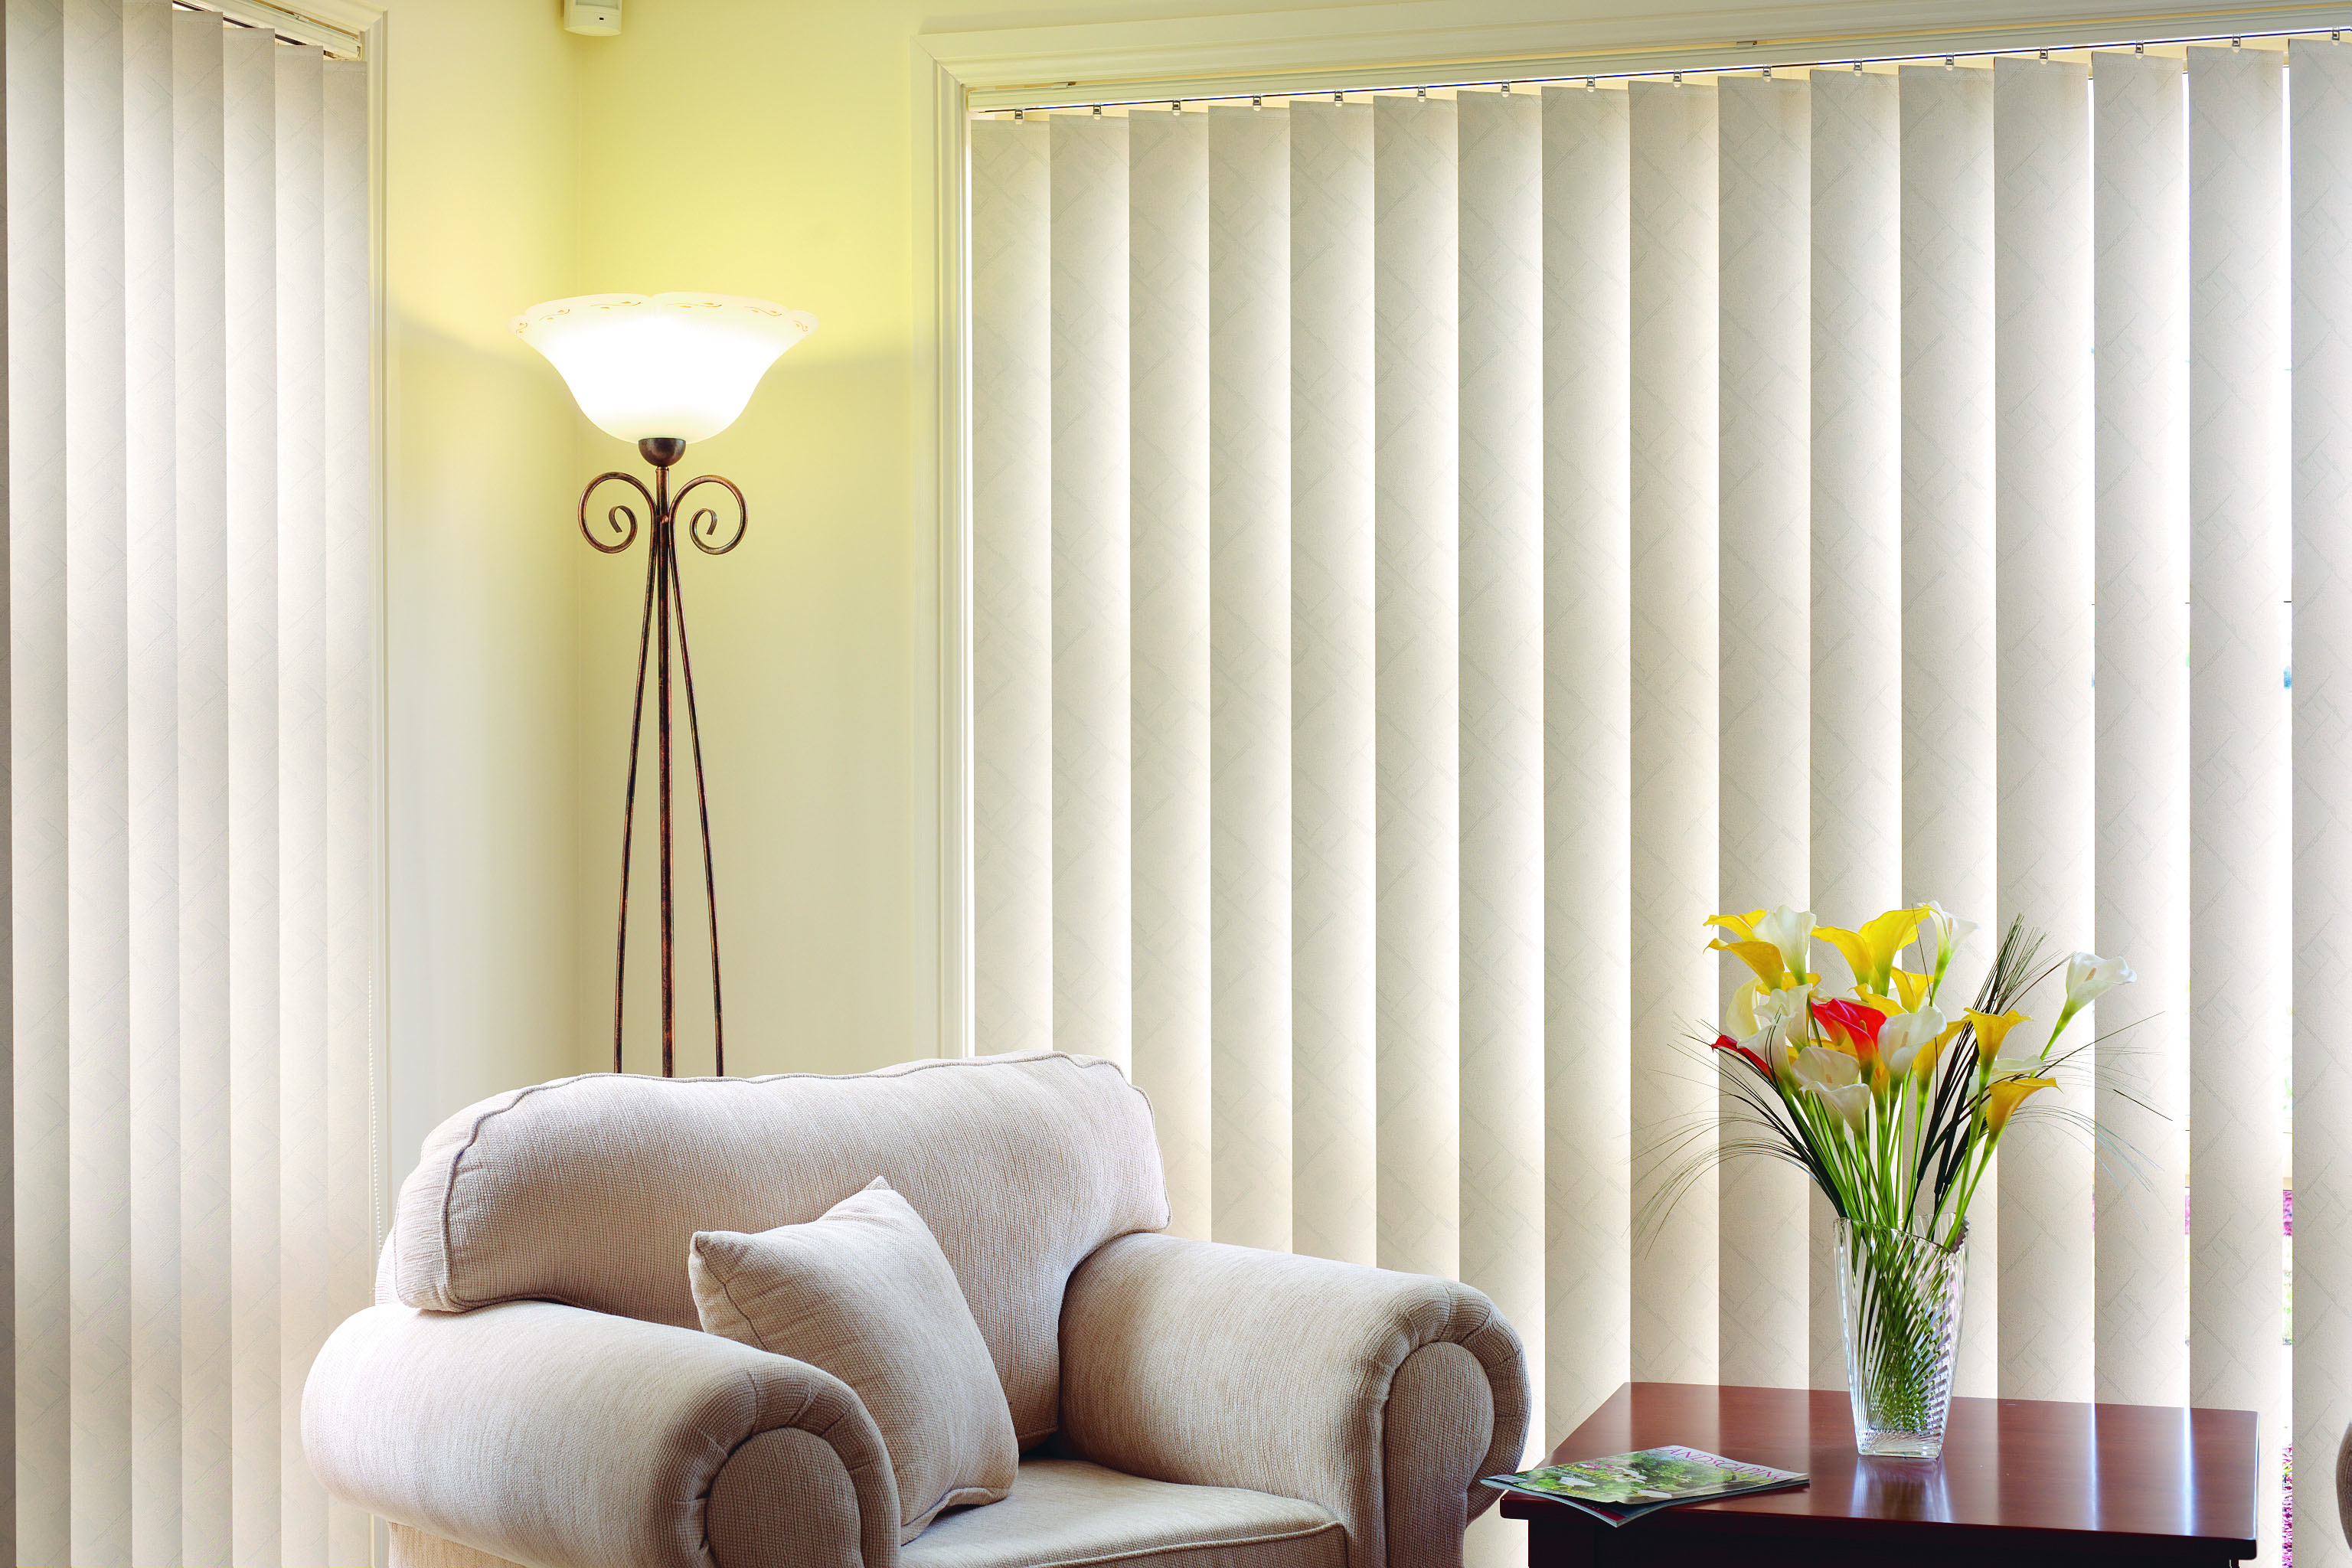 Looking To Buy Electric Vertical Blinds In Sydney